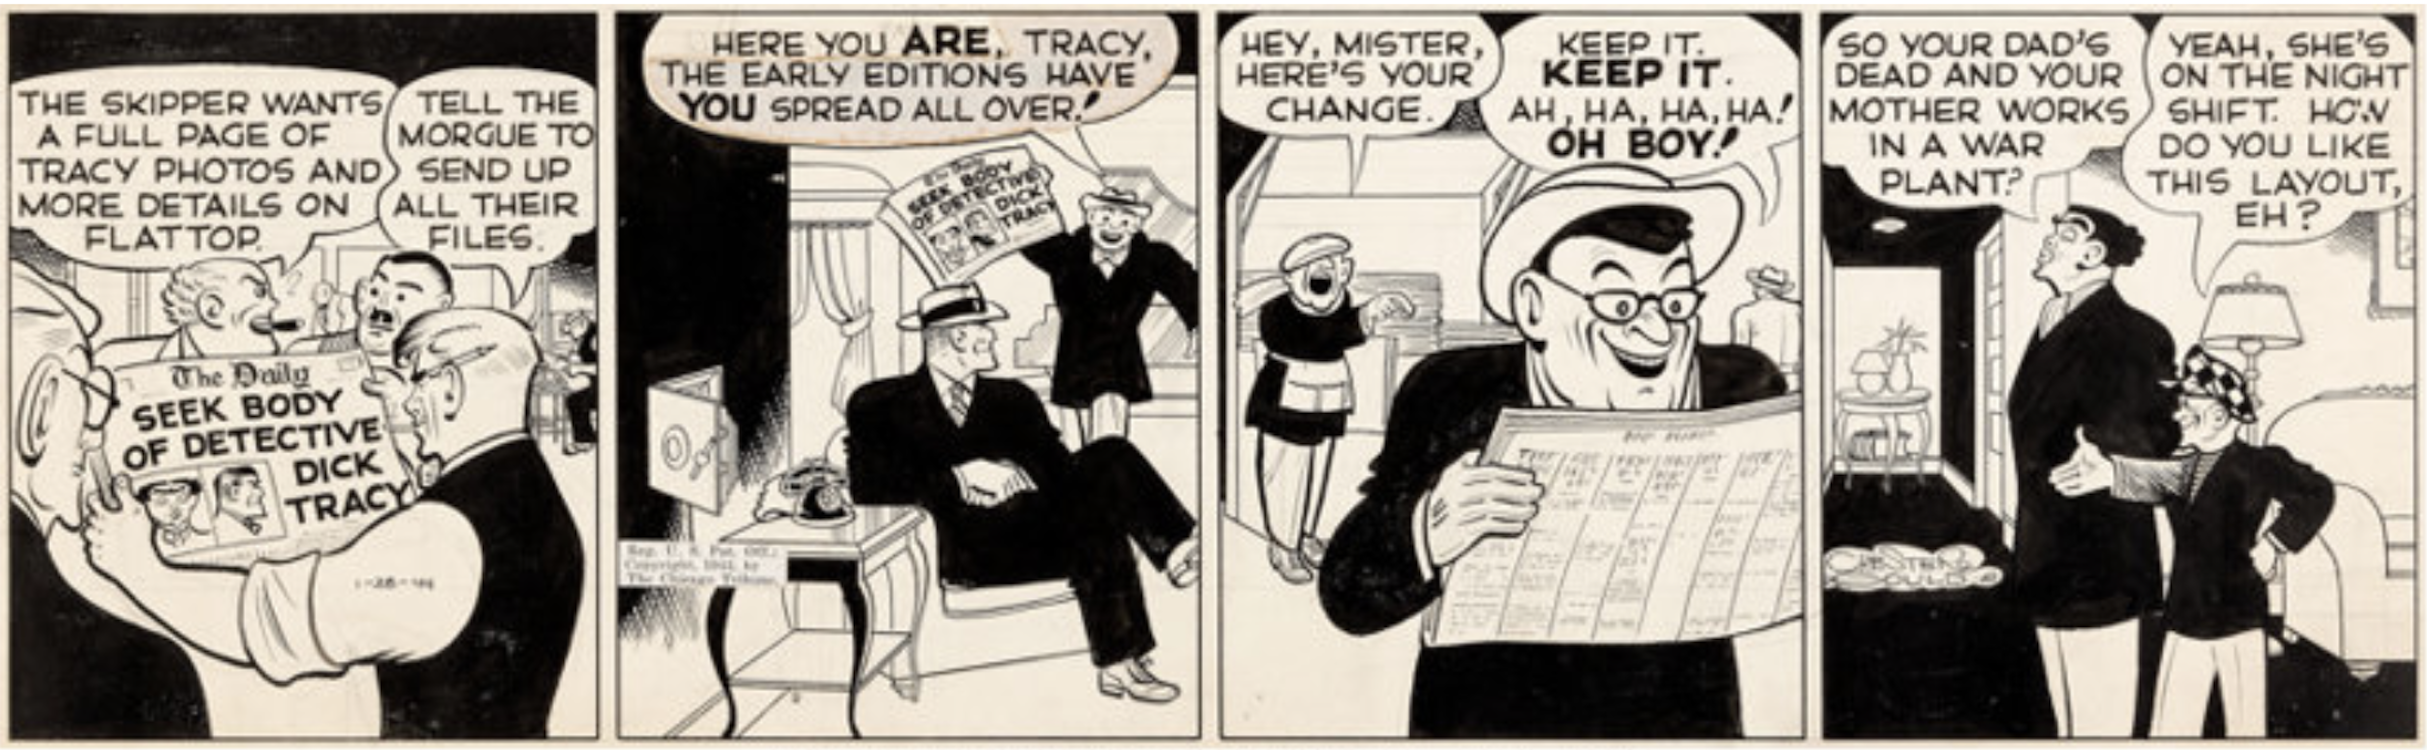 Dick Tracy Daily Comic Strip 1-28-44 by Chester Gould sold for $8,365. Click here to get your original art appraised.